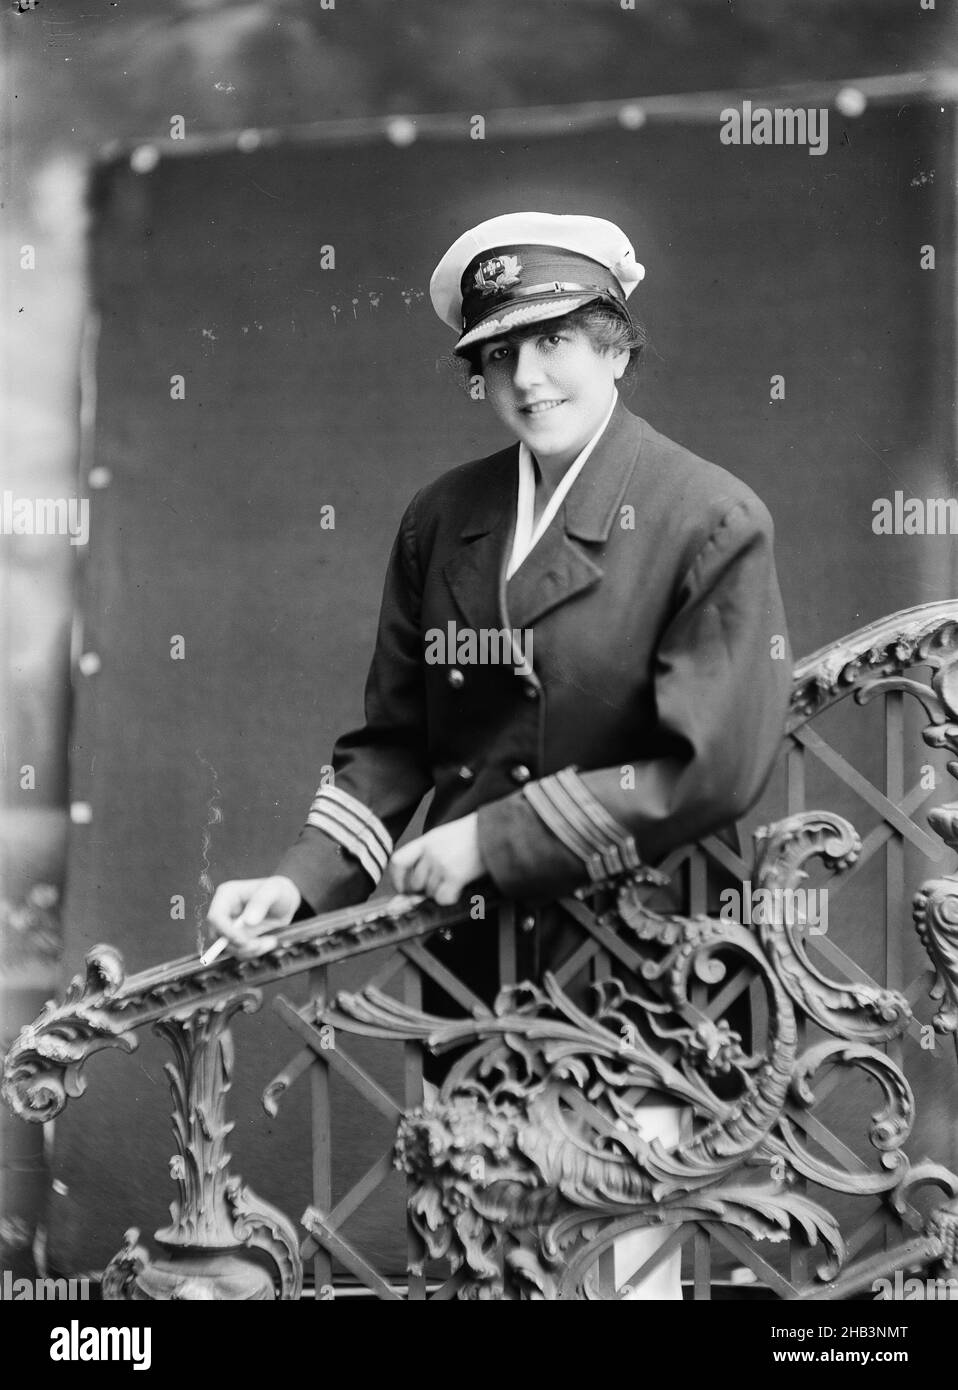 Wright, Berry & Co, photography studio, circa 1920, Wellington, black-and-white photography, Woman in uniform behind ornate bannister Stock Photo